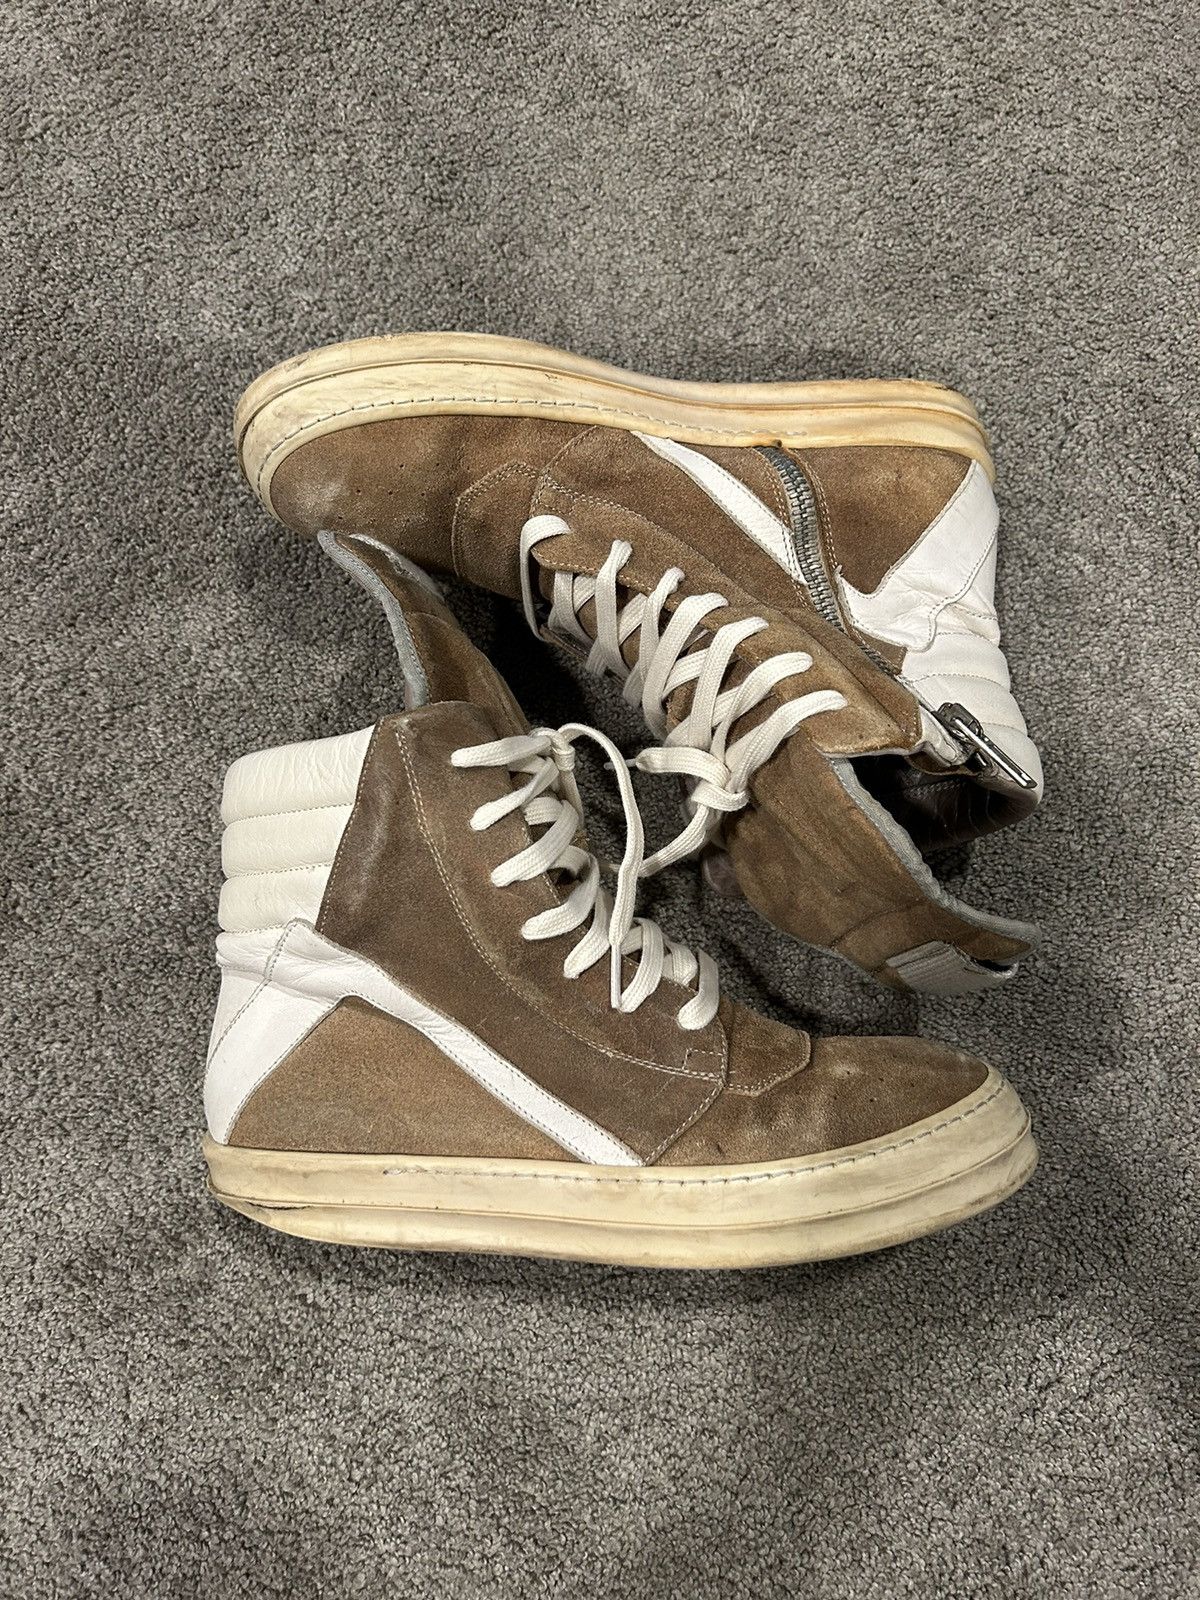 Pre-owned Rick Owens Brown Suede Geobaskets Shoes